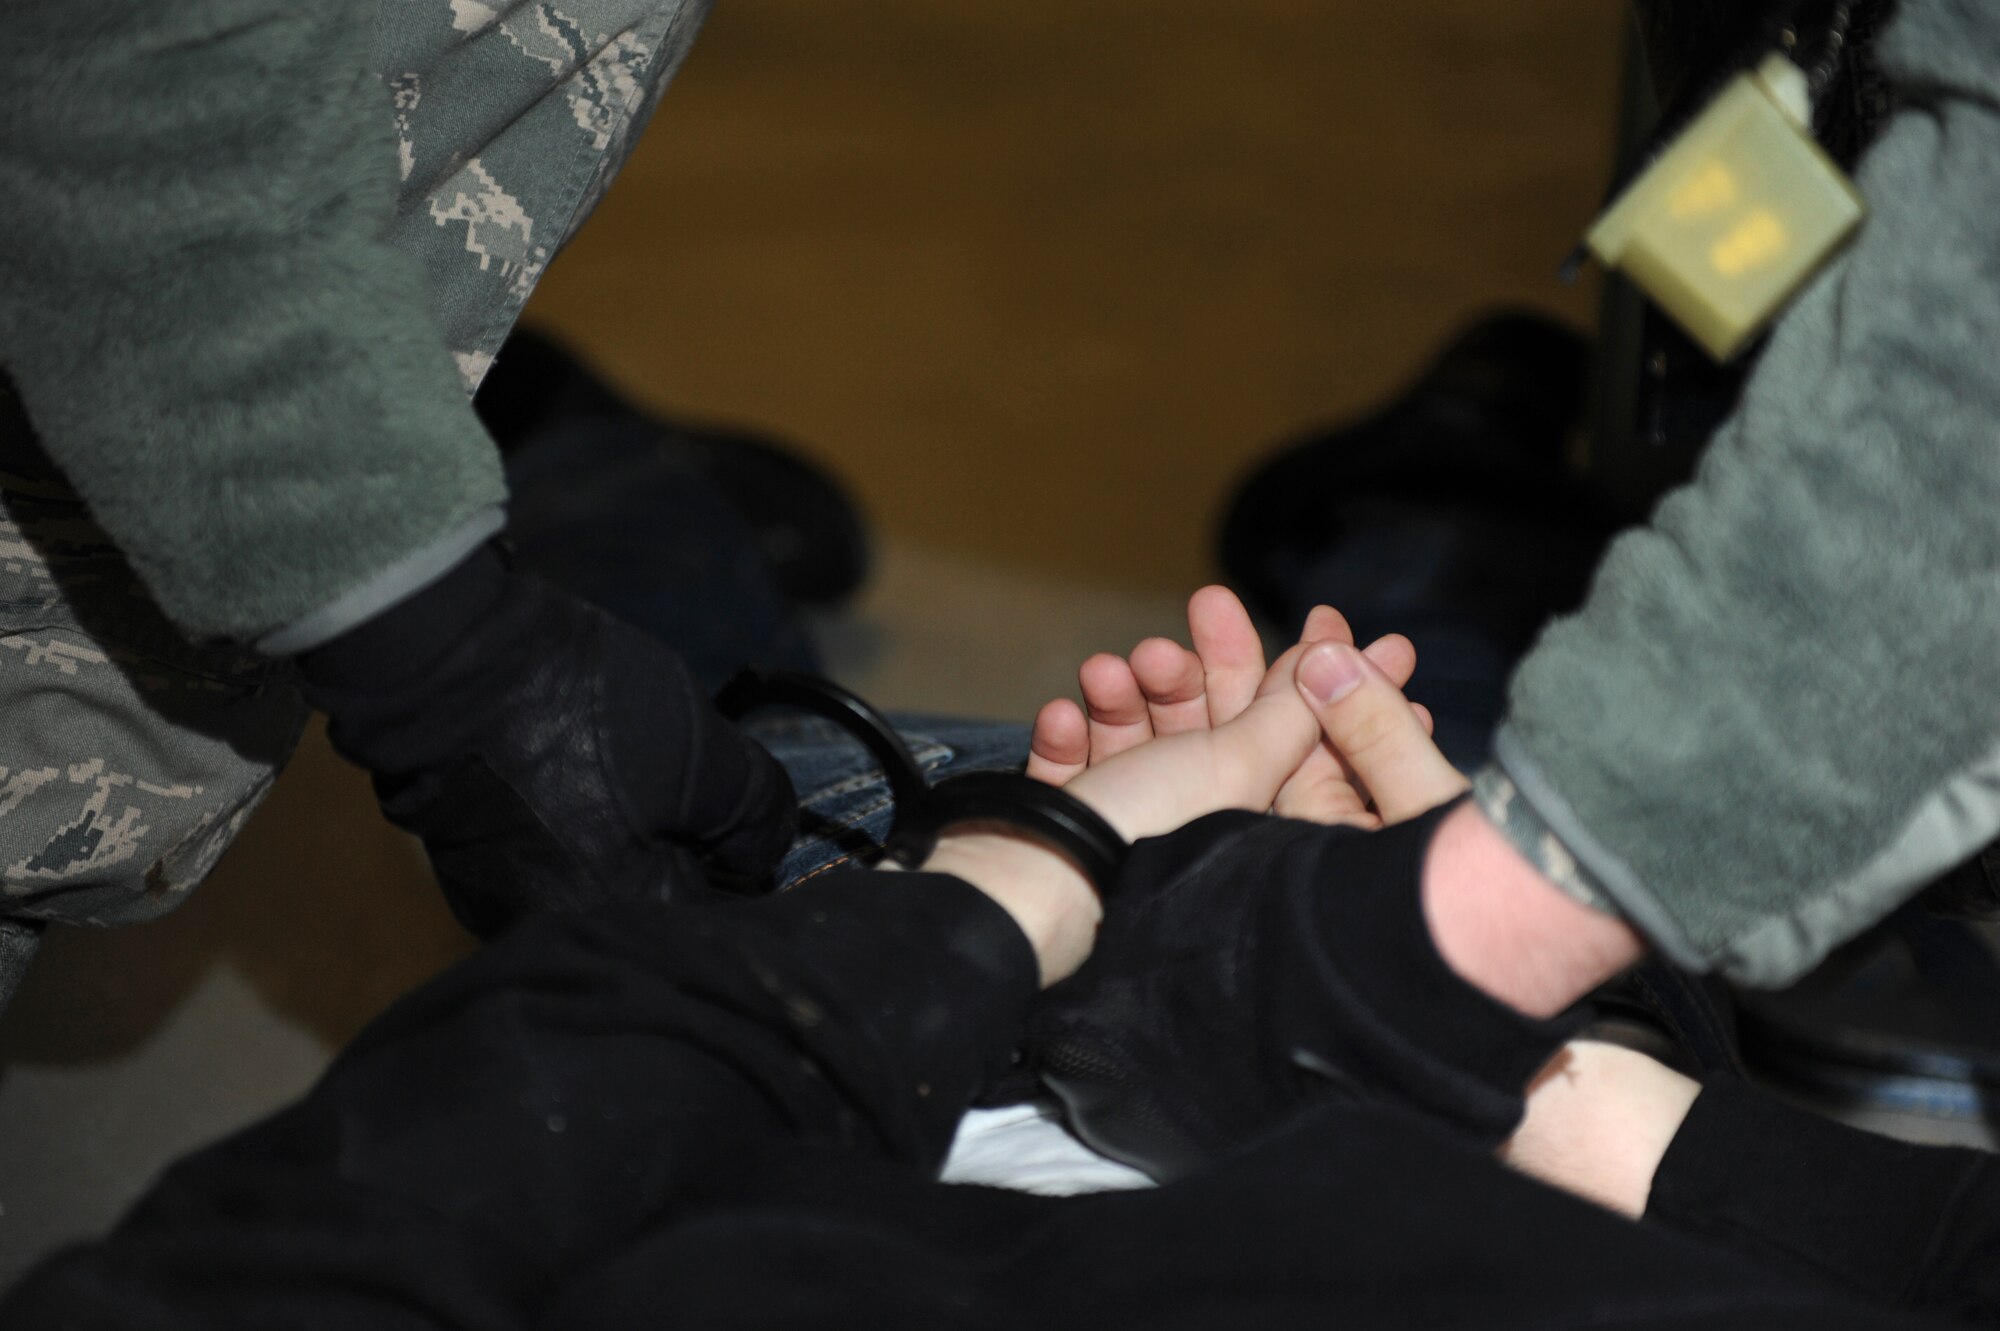 SPANGDAHLEM AIR BASE, Germany – A suspect is handcuffed during an active-shooter training exercise at Bldg. 103 here Feb. 17. The 52nd Fighter Wing conducted the exercise to test the wing’s response to an active-shooter situation. Training like this readies the base to respond to real emergency events protecting base members and U.S. government assets. (U.S. Air Force photo by Airman 1st Class Matthew B. Fredericks/Released)